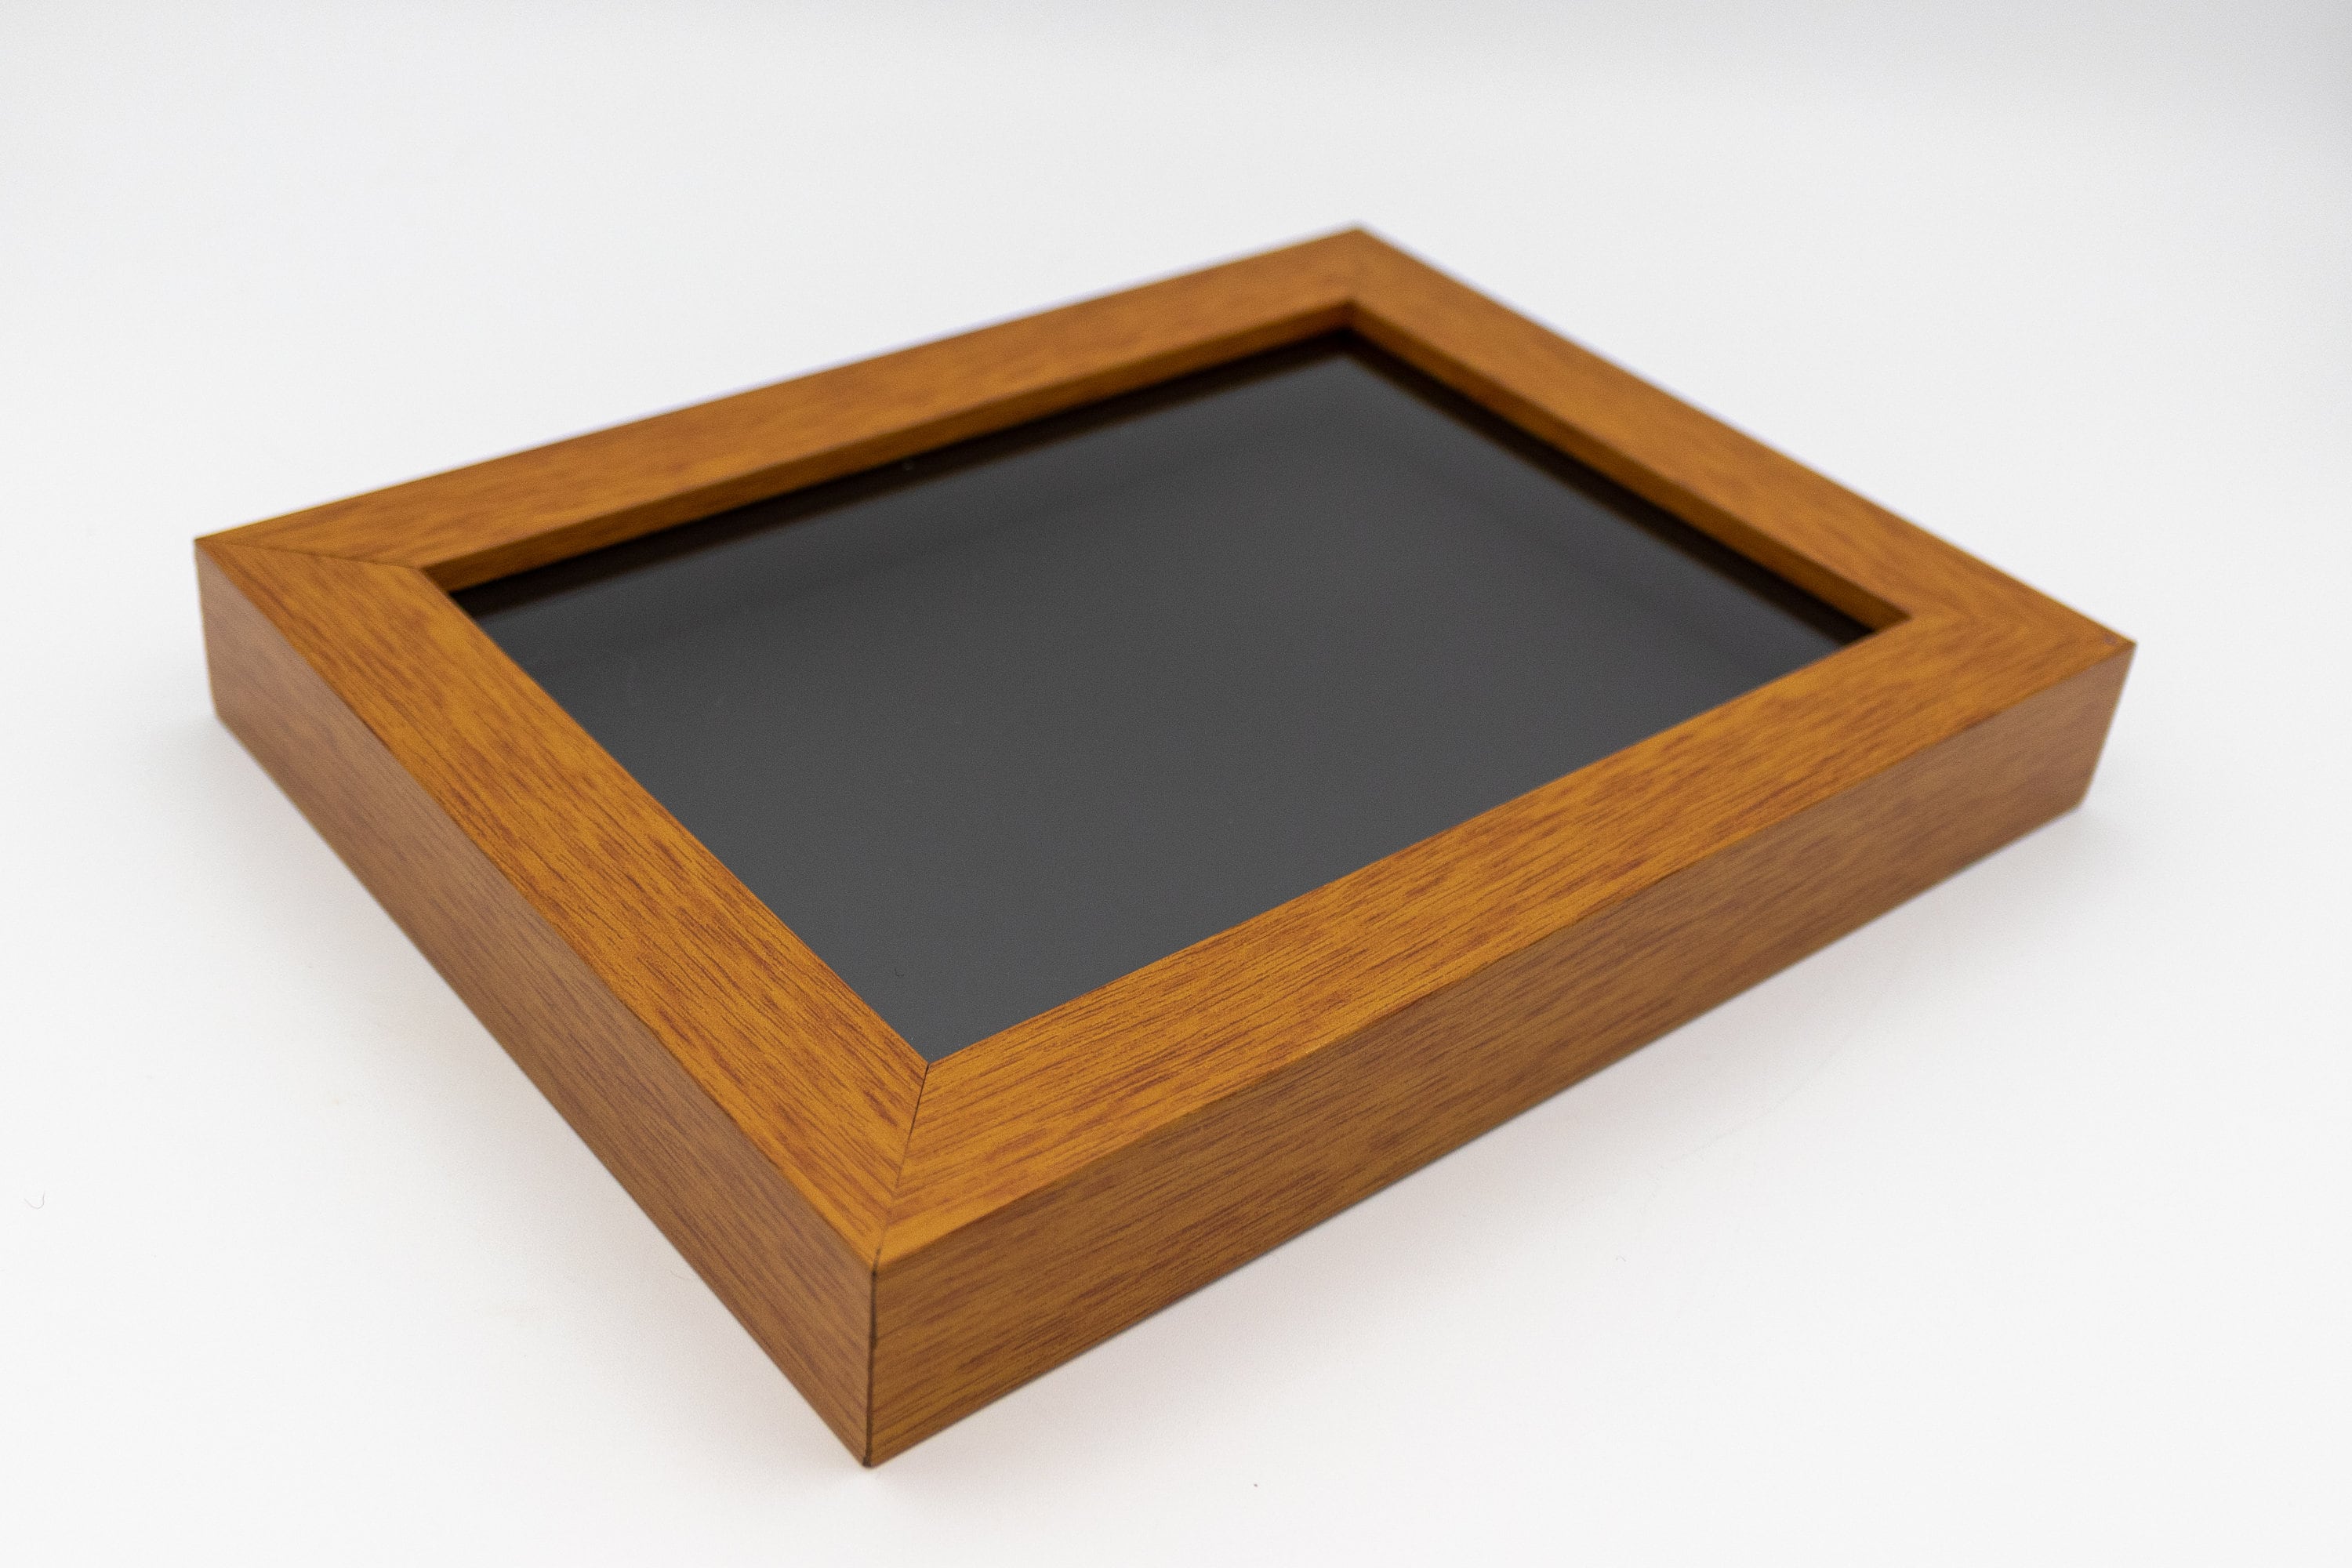 8x8 Brown Walnut Shadow Box Frame - 3/4 of Depth | Includes Hardware|Brown